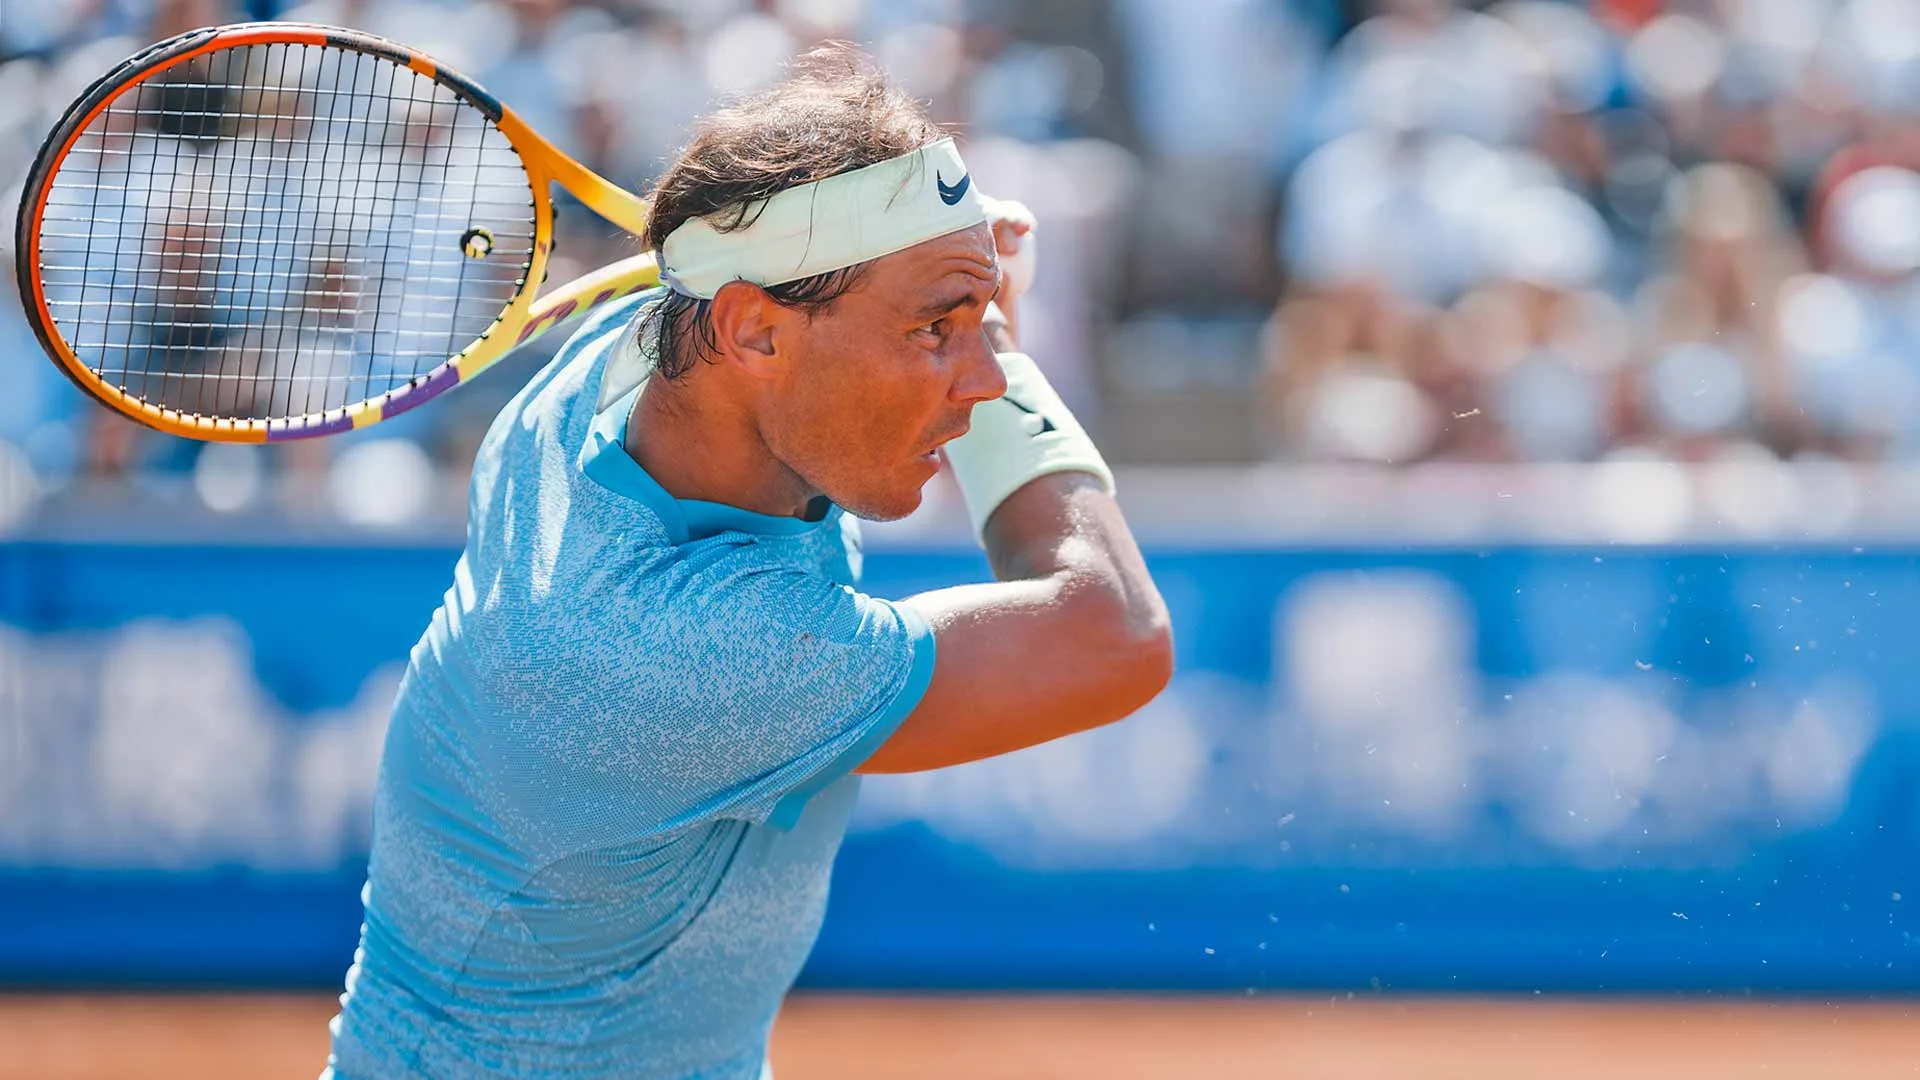 Nadal continues to improve, reaches first semi-final of the season